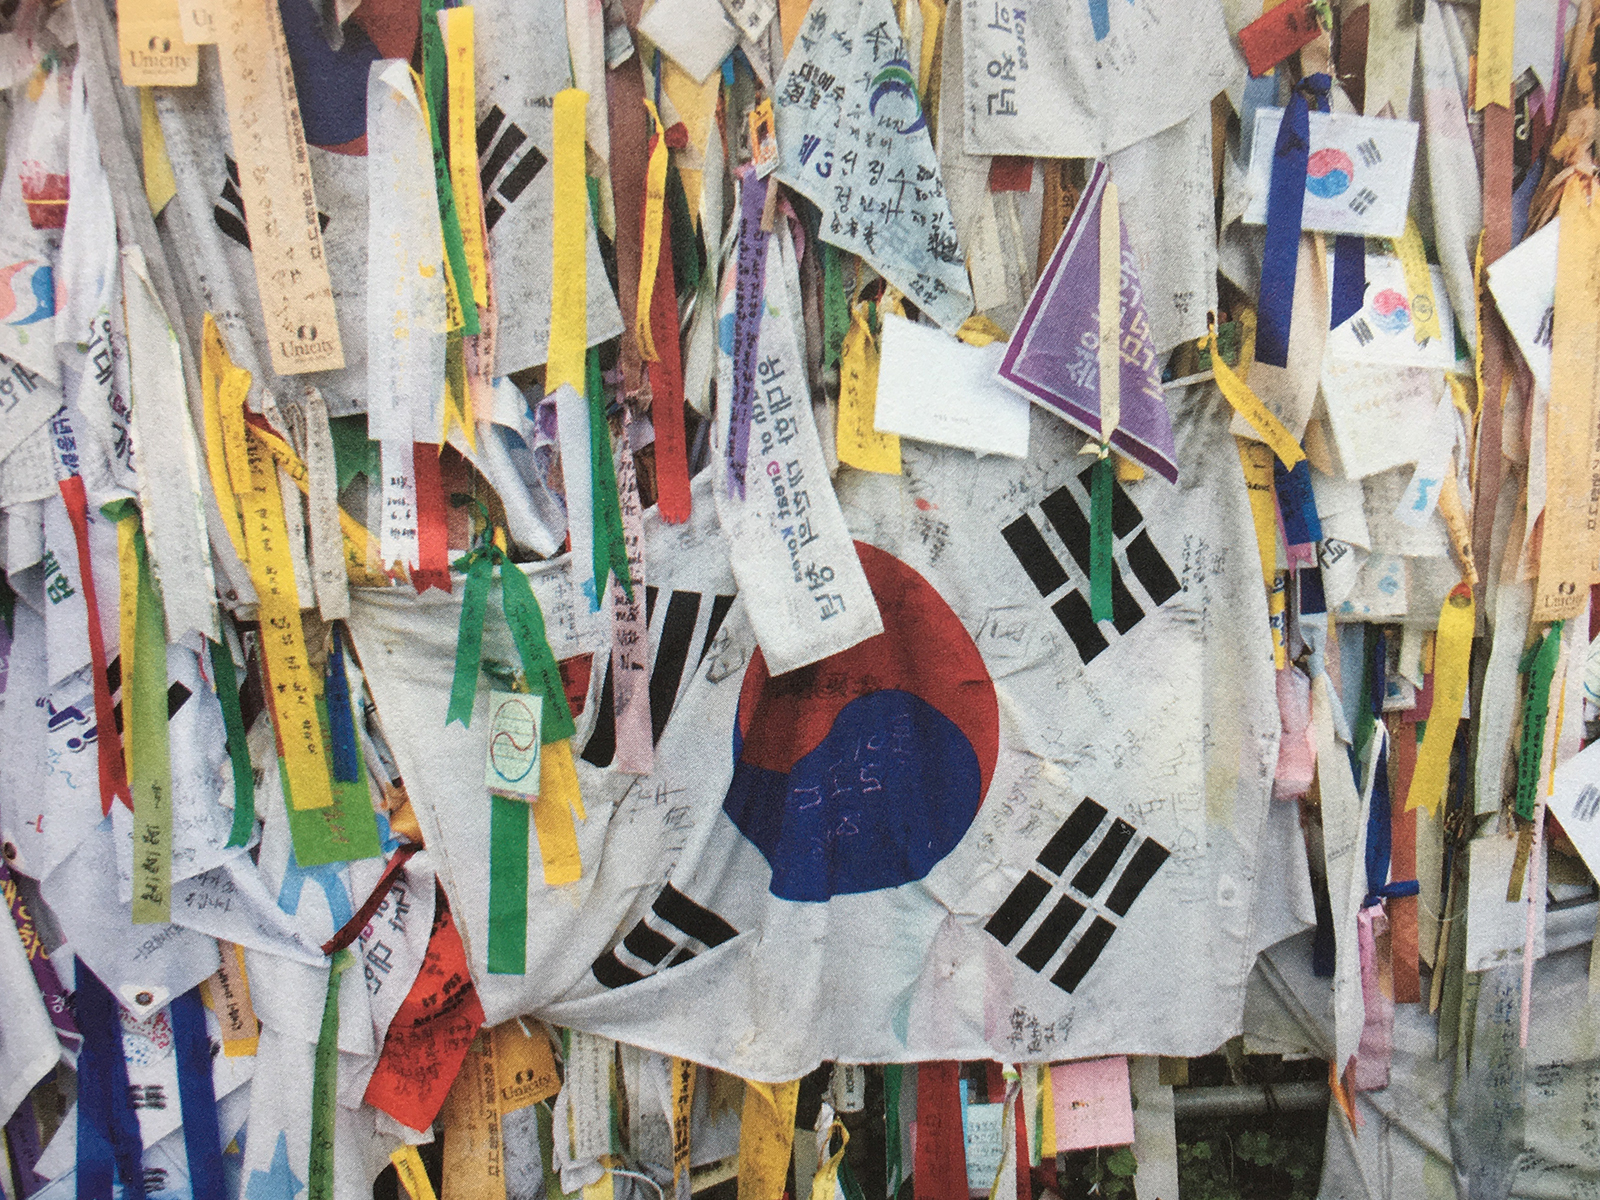 Colorful ribbons hang on a fence in South Korea near the DMZ